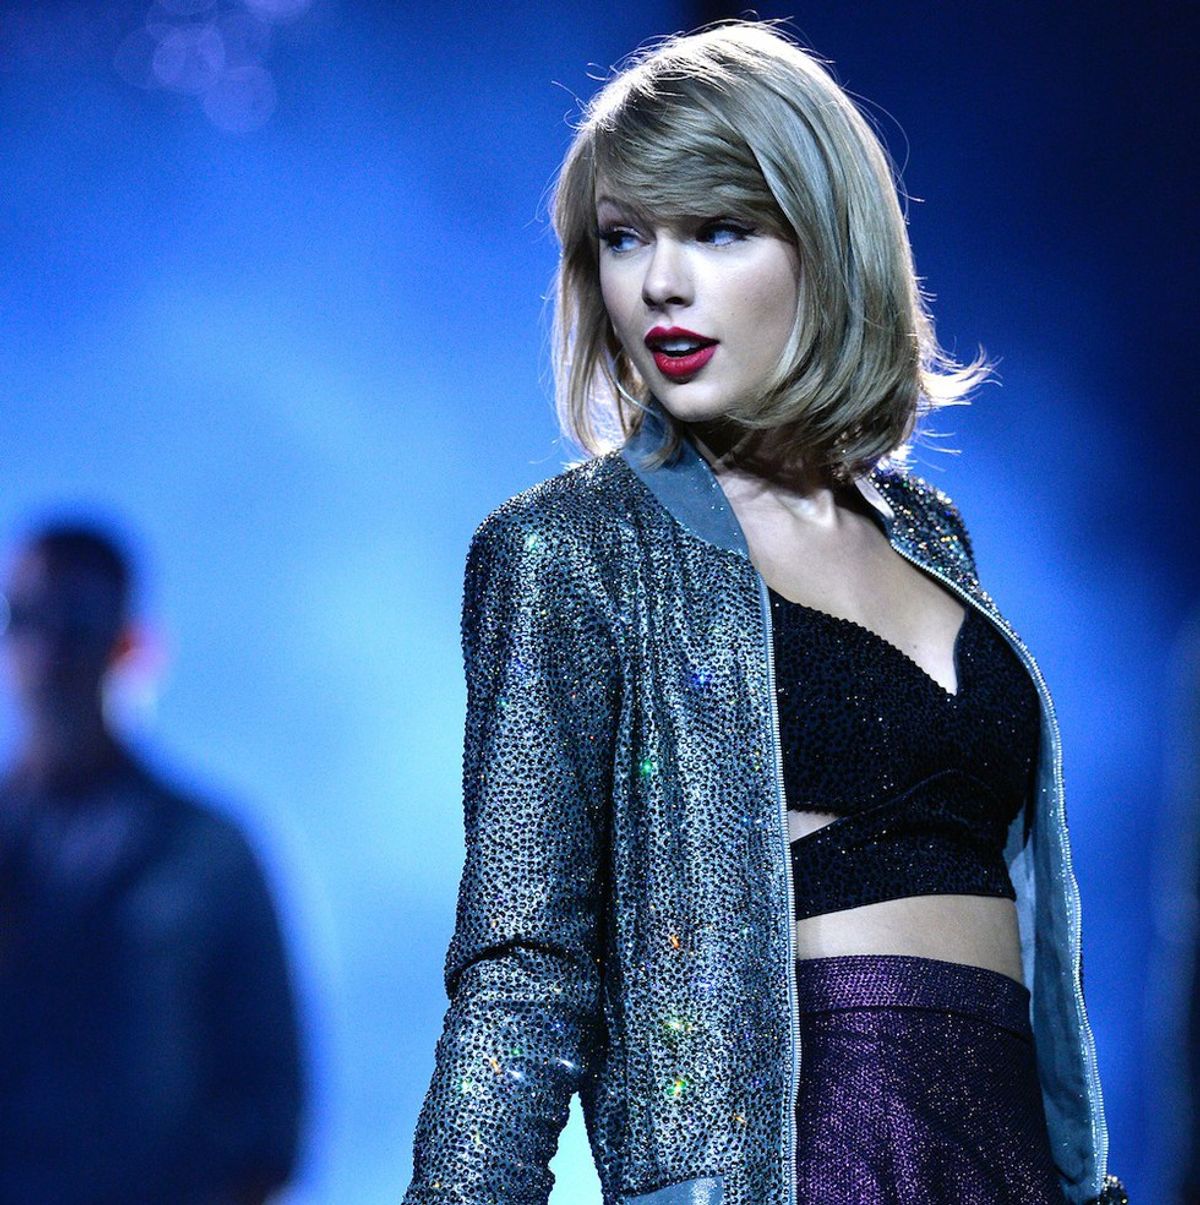 An Open Letter To Taylor Swift, Please Come Back